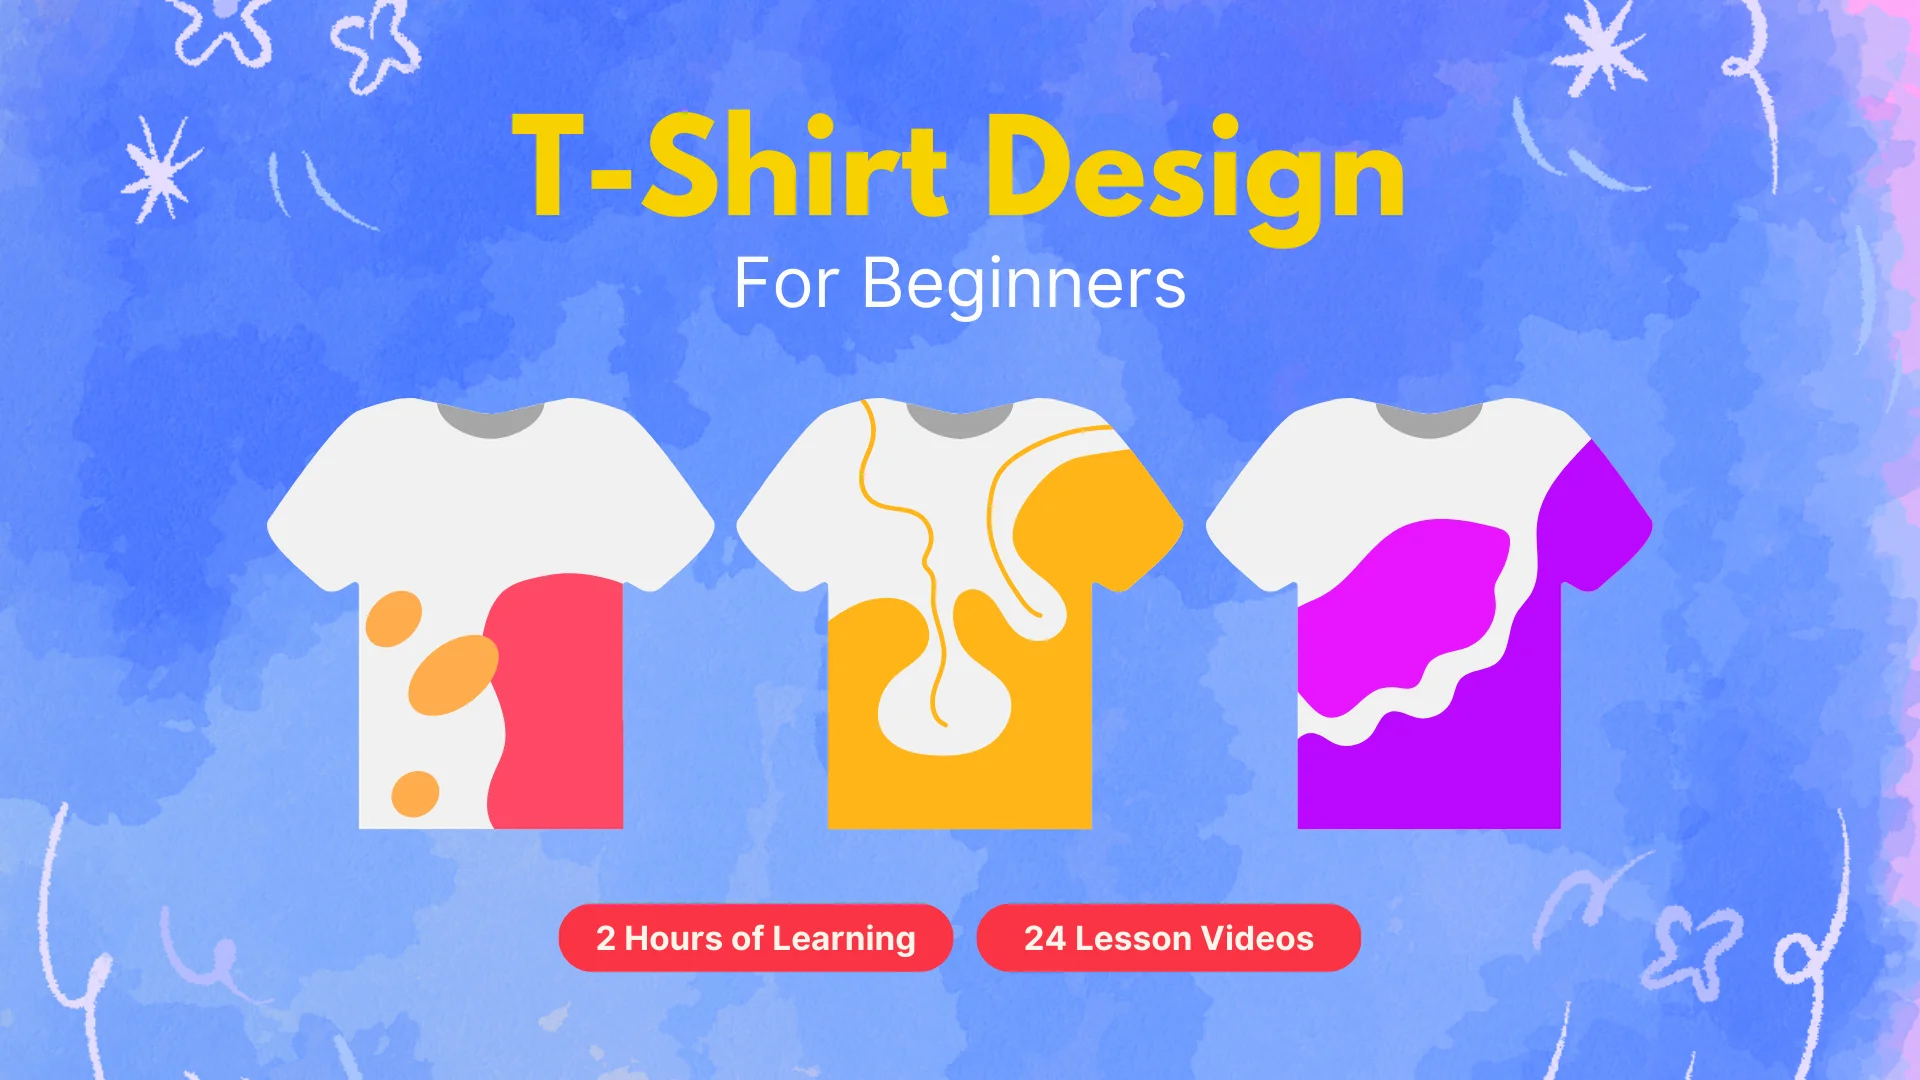 T-shirt Design for Beginners Course Image